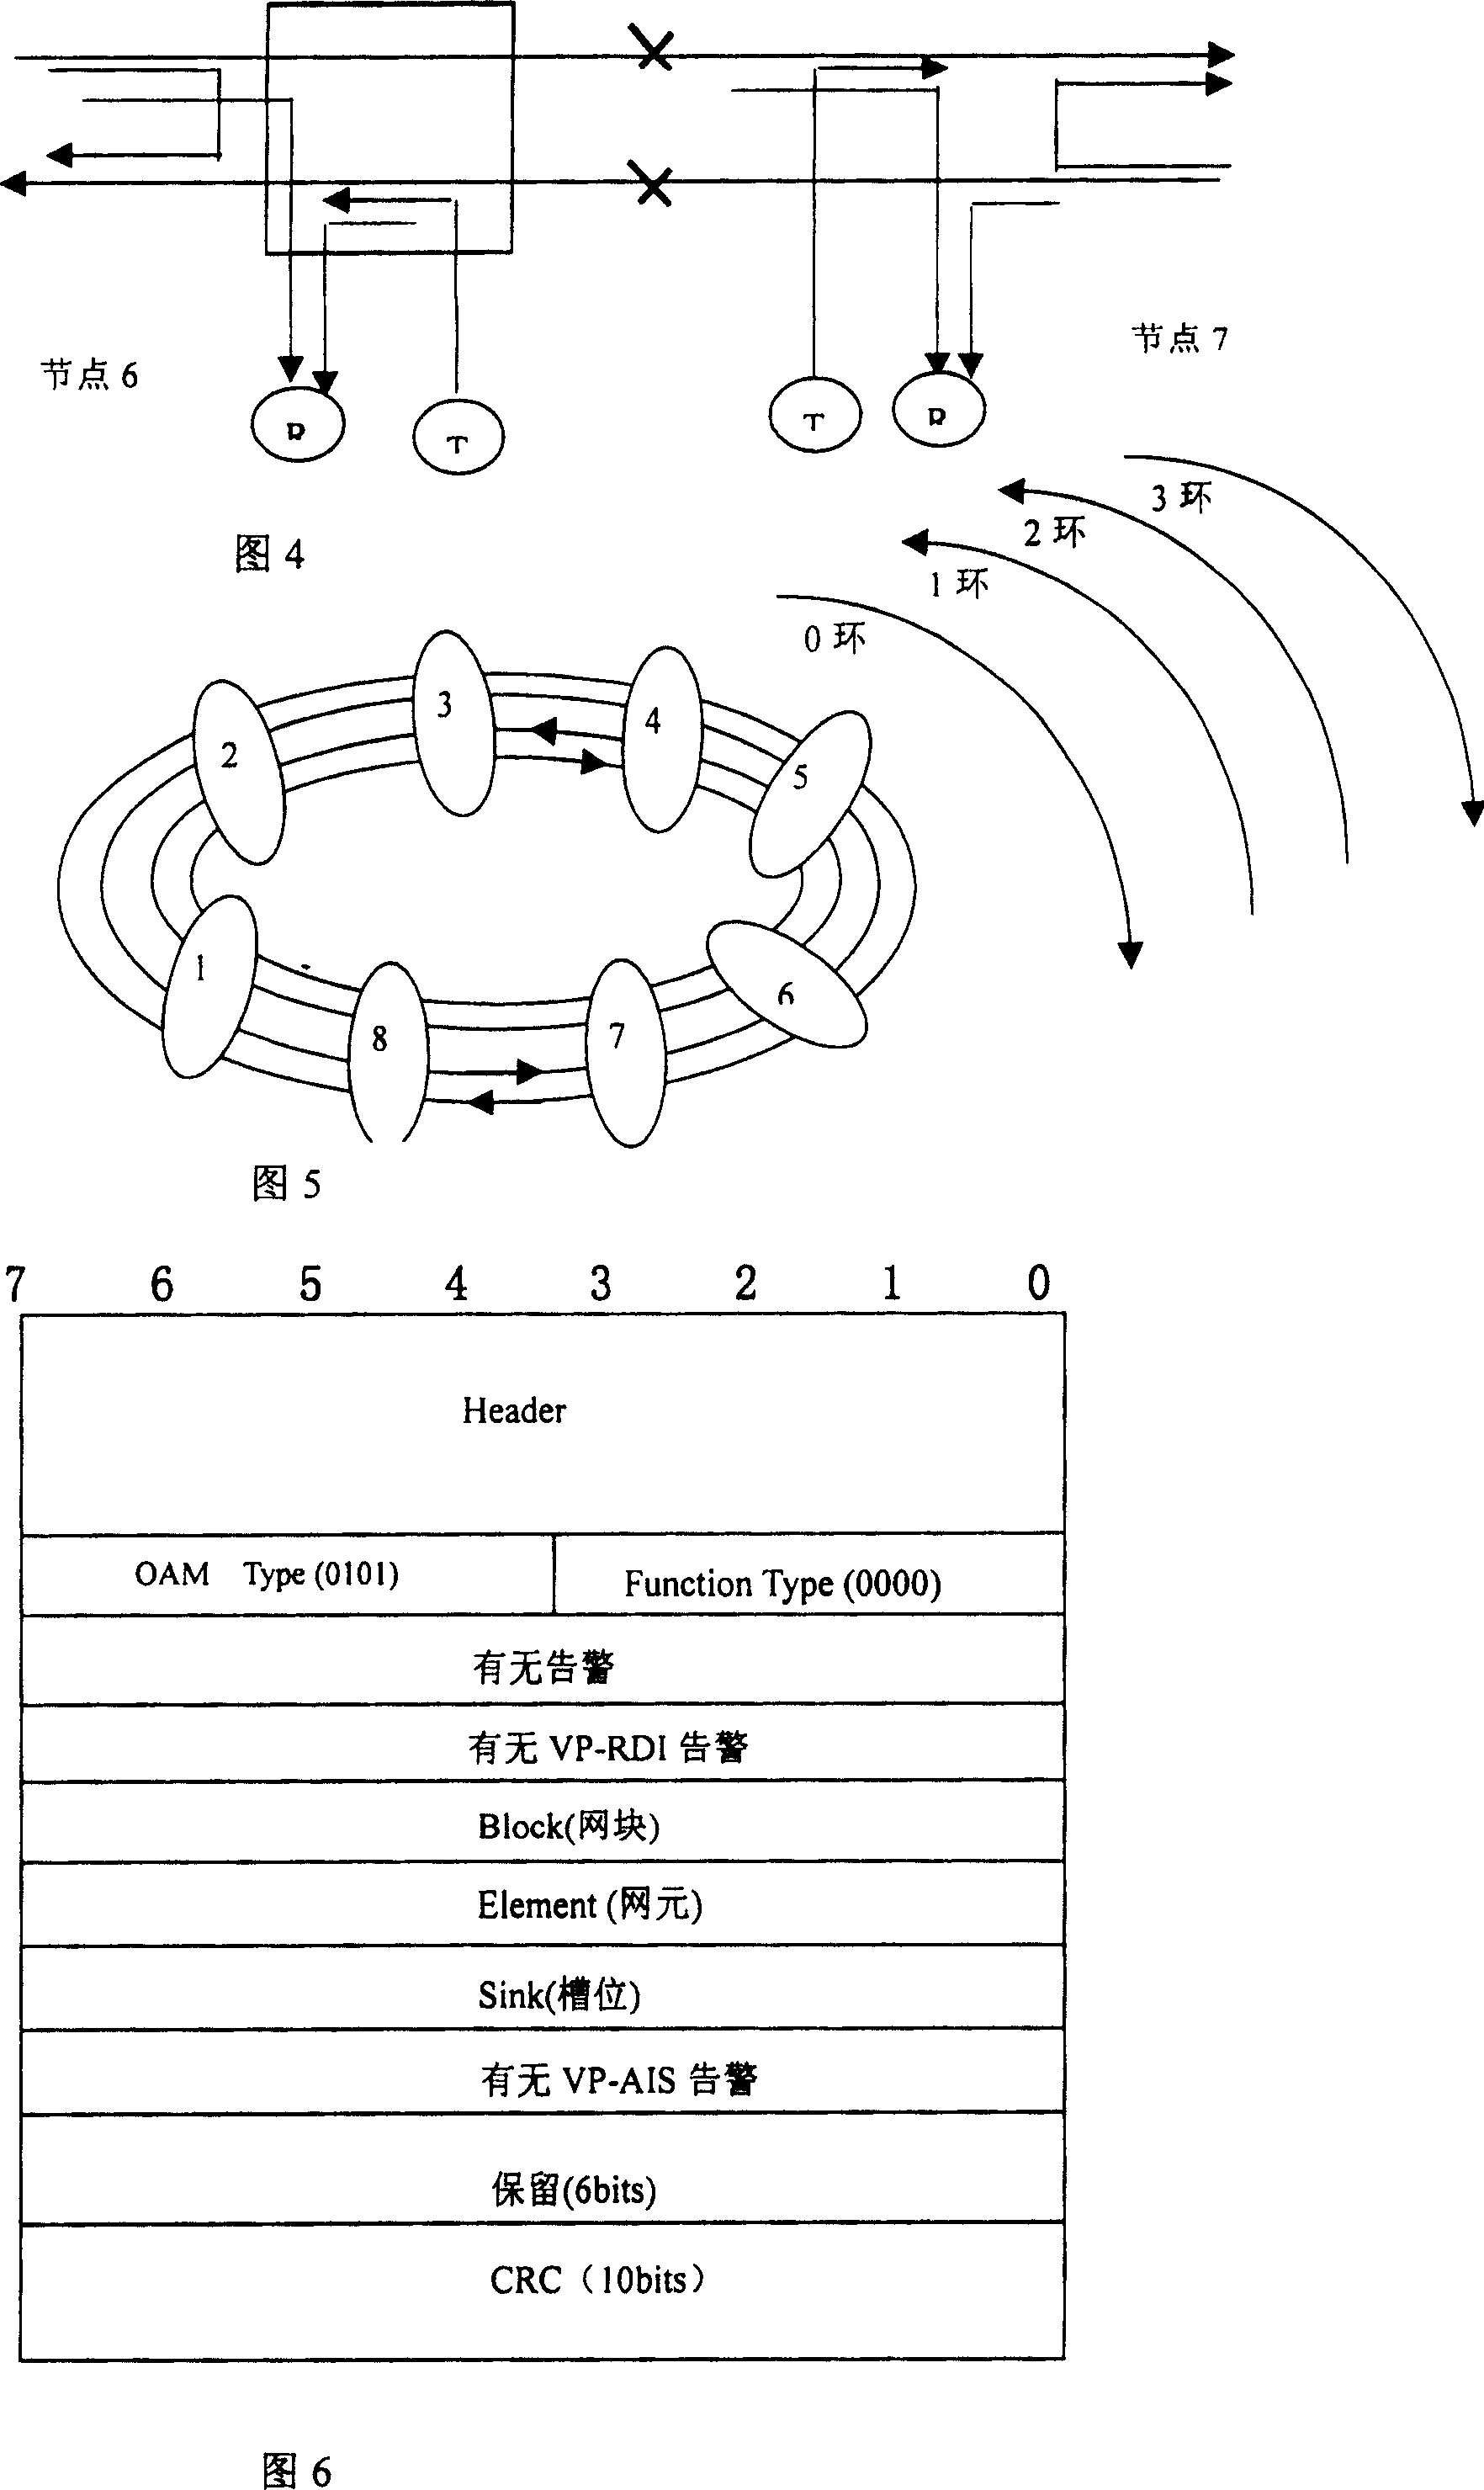 Method for carrying out VPR protection inversion in network